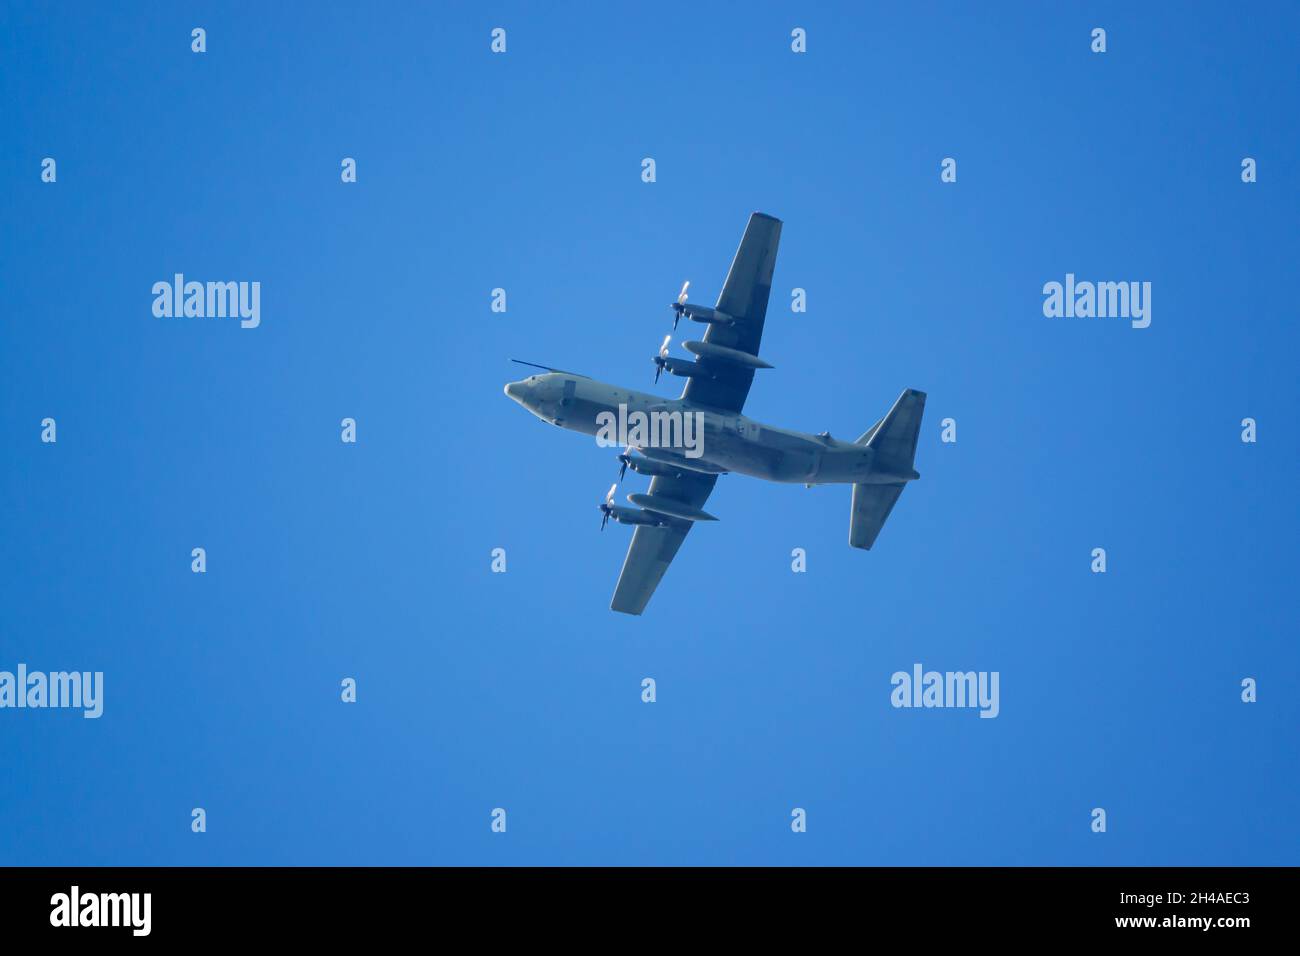 Lockheed Martin C-130J Super Hercules UK Royal Air Force air refueling aircraft flying overhead in clear deep blue sky, Wiltshire UK Stock Photo